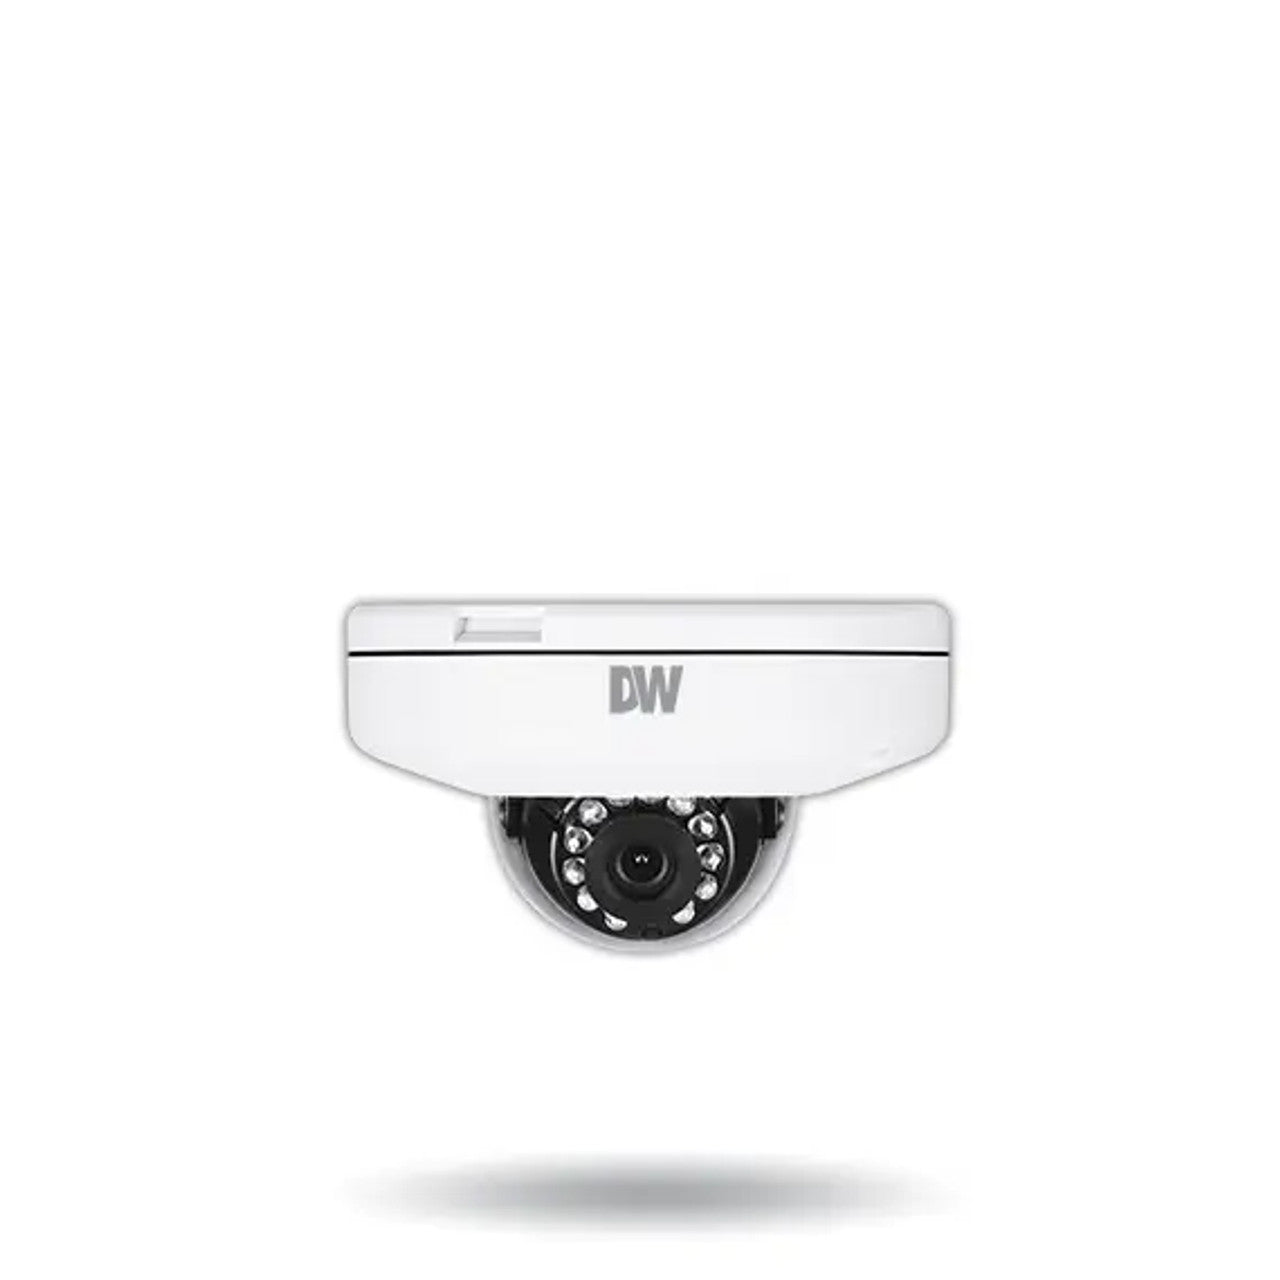 Digital Watchdog DWC-MF4Wi6WC5 4MP Night Vision Outdoor Dome IP Security Camera, CaaS, 512GB Storage, 6.0mm Fixed Lens